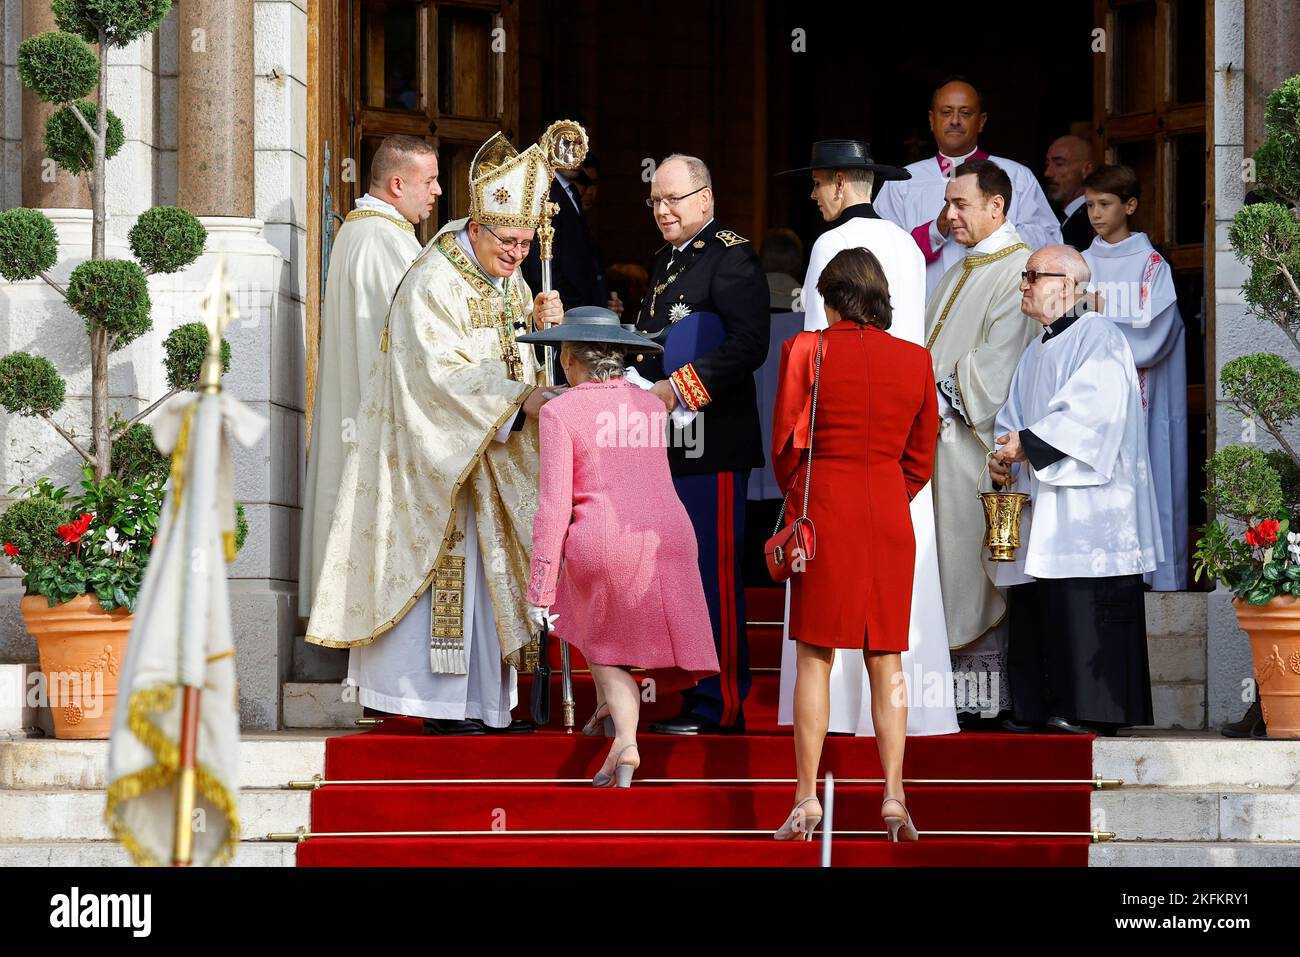 Archbishop of Monaco Dominique-Marie David welcomes Prince Albert II of Monaco, Princess Charlene, Princess Caroline of Hanover and Princess Stephanie as they arrive to attend a mass at Monaco Cathedral during the celebrations marking Monaco's National Day, November 19, 2022. REUTERS/Eric Gaillard Stock Photo